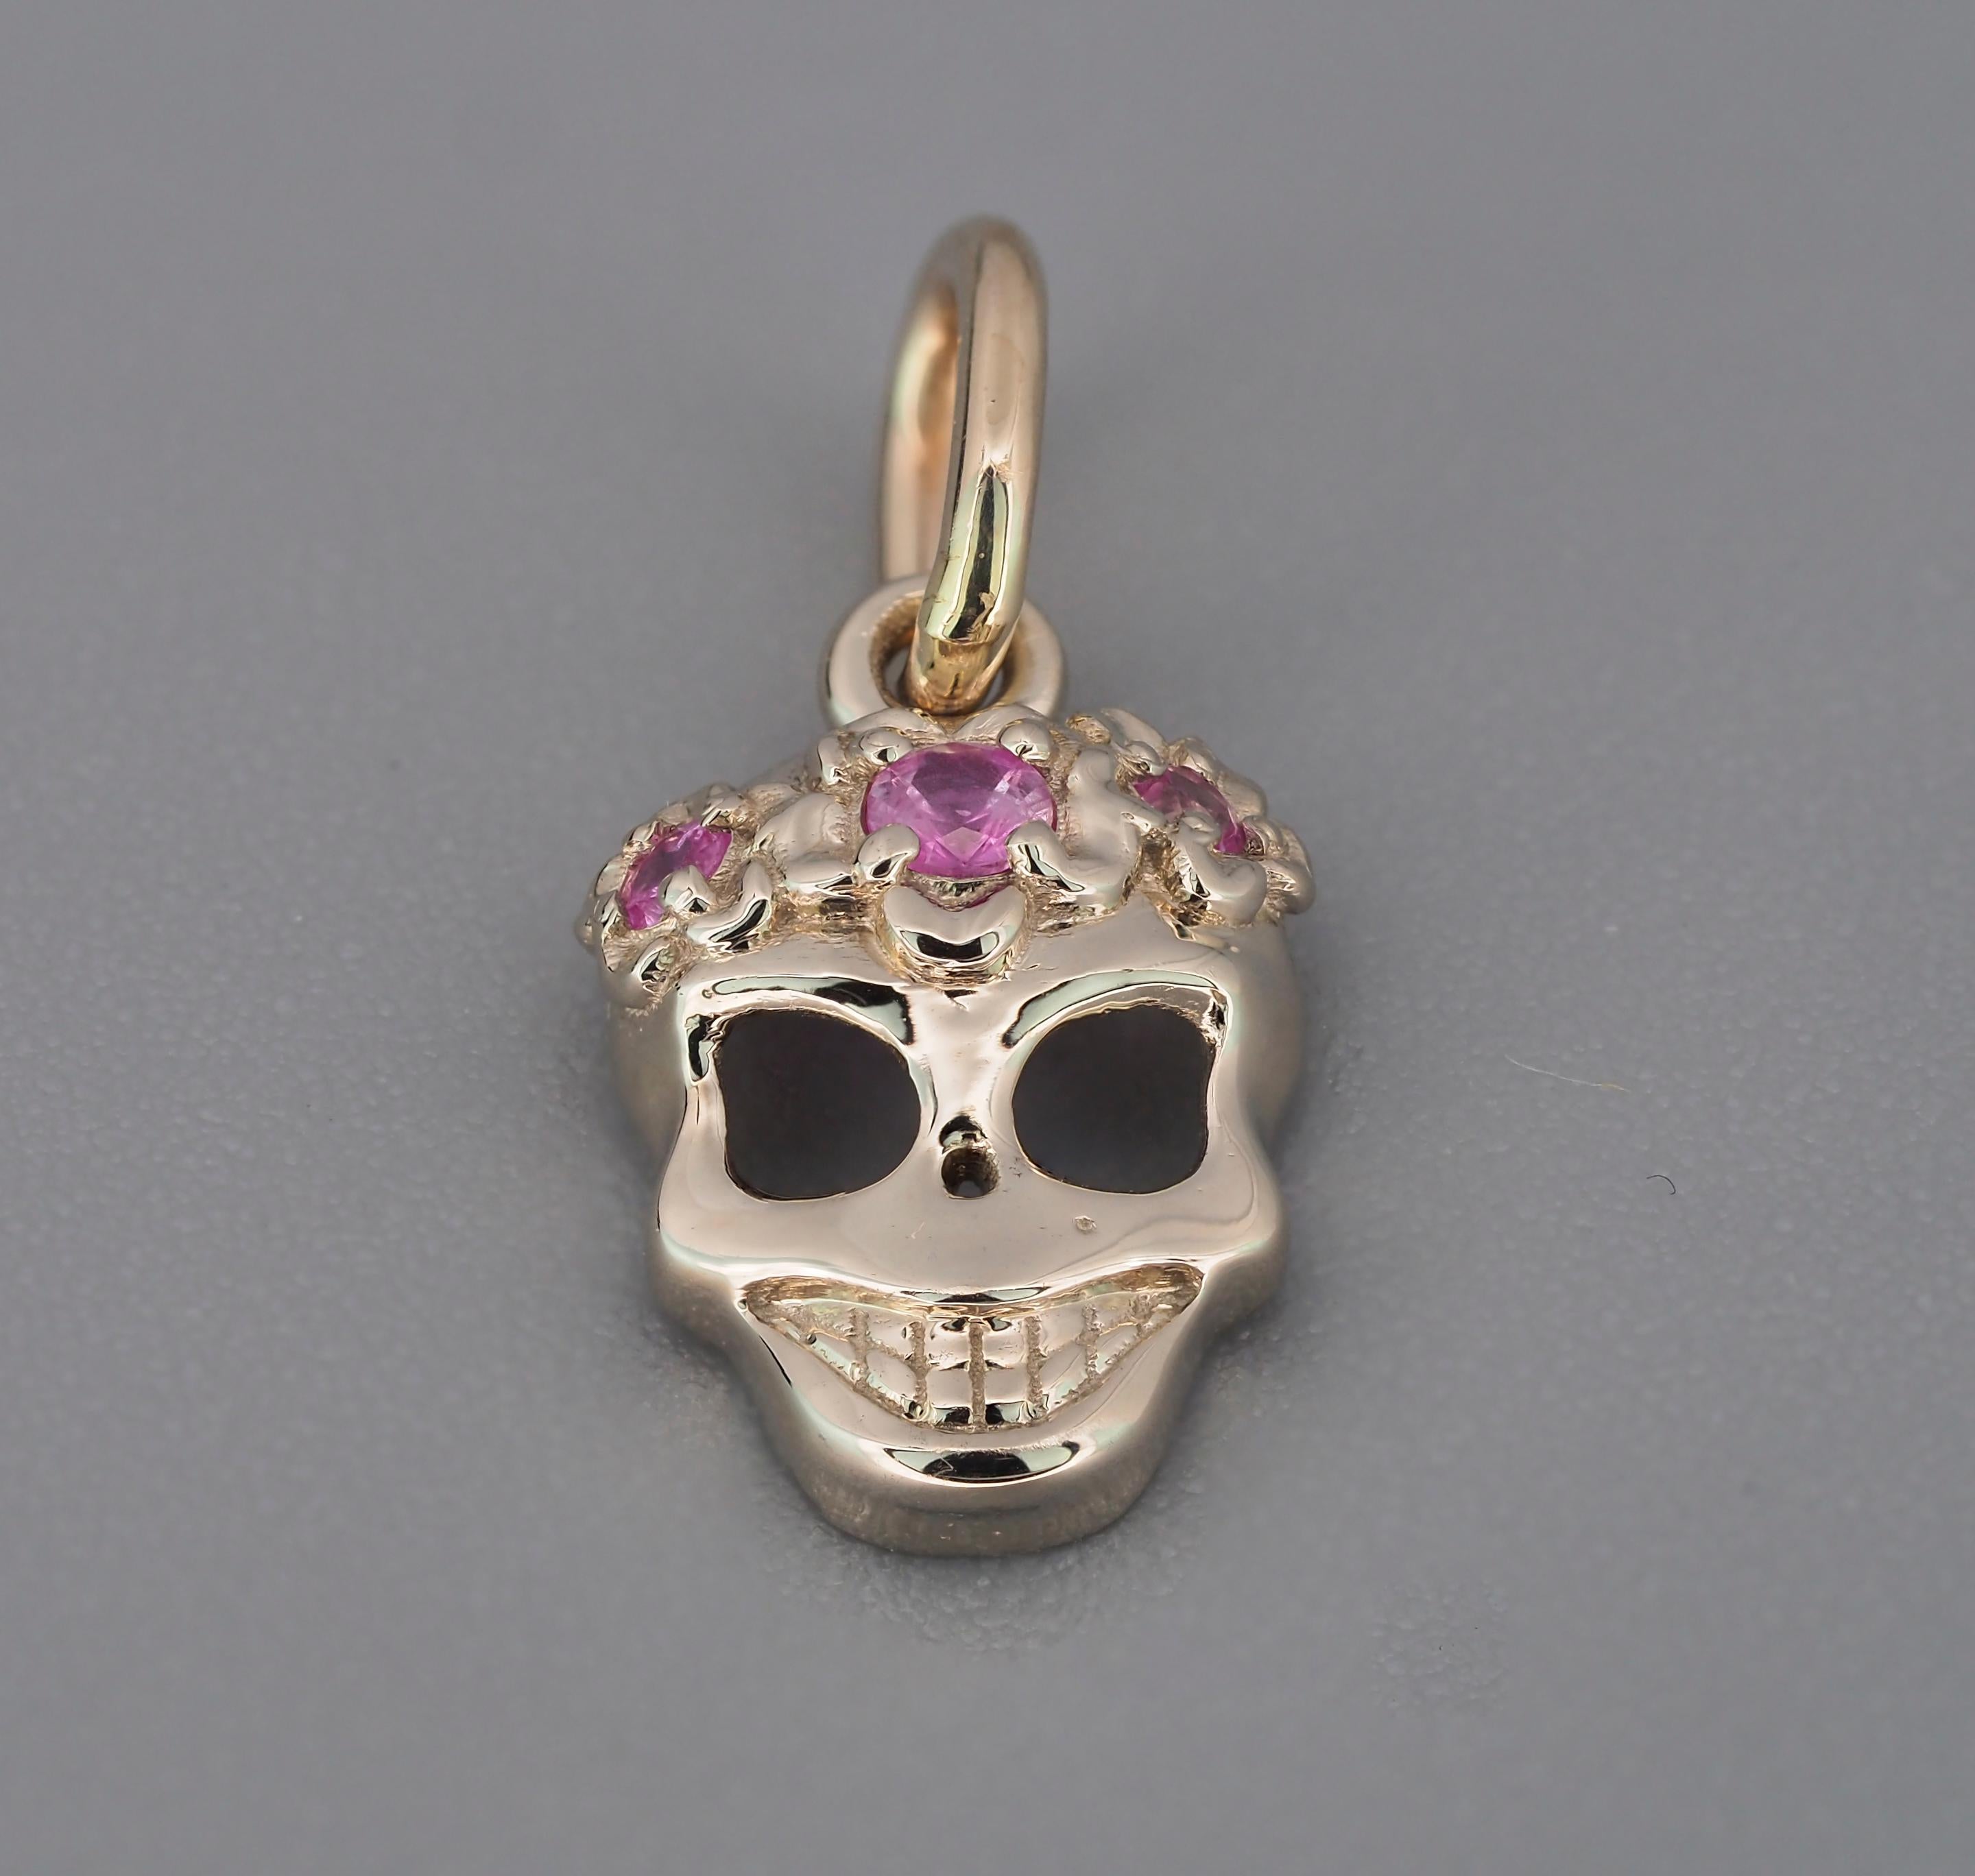 14k solid gold skull pendant with flowers with natural sapphires.
White and yellow solid
Weight: 0.95 g.
Size: 16.3 x 8 mm.
Set with sapphires: 3 pieces, pink color, transparent
Round cut, 2.8 and 2 mm, weight - 0.22 ct.


💍This pendant is making